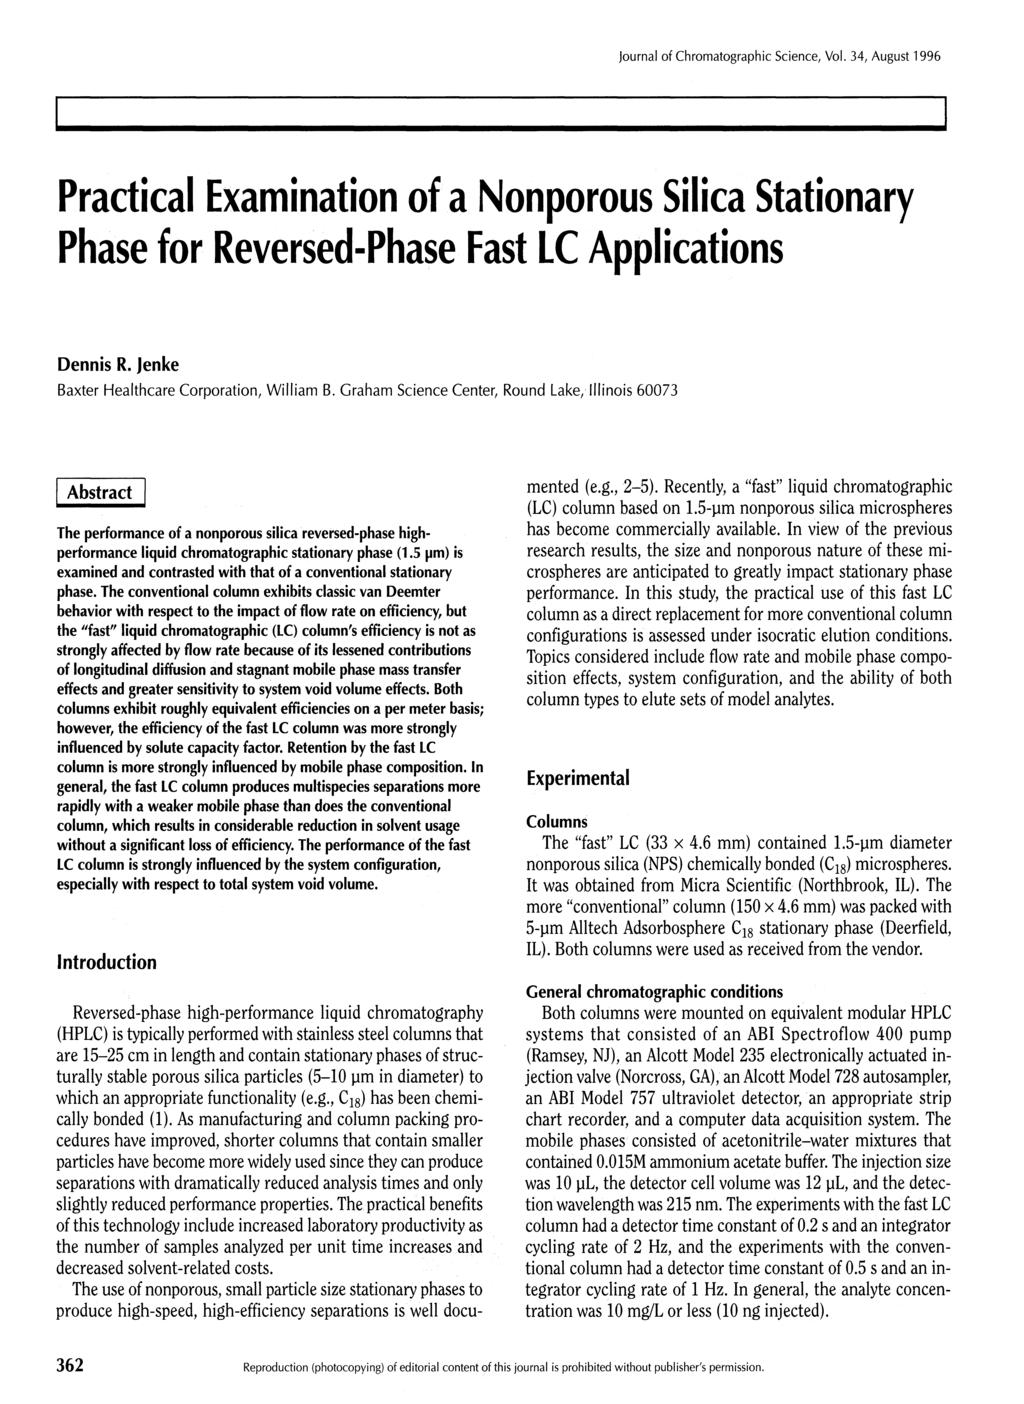 Practical Examination of a Nonporous Silica Stationary Phase for Reversed-Phase Fast LC Applications Dennis R. Jenke Baxter Healthcare Corporation, William B.